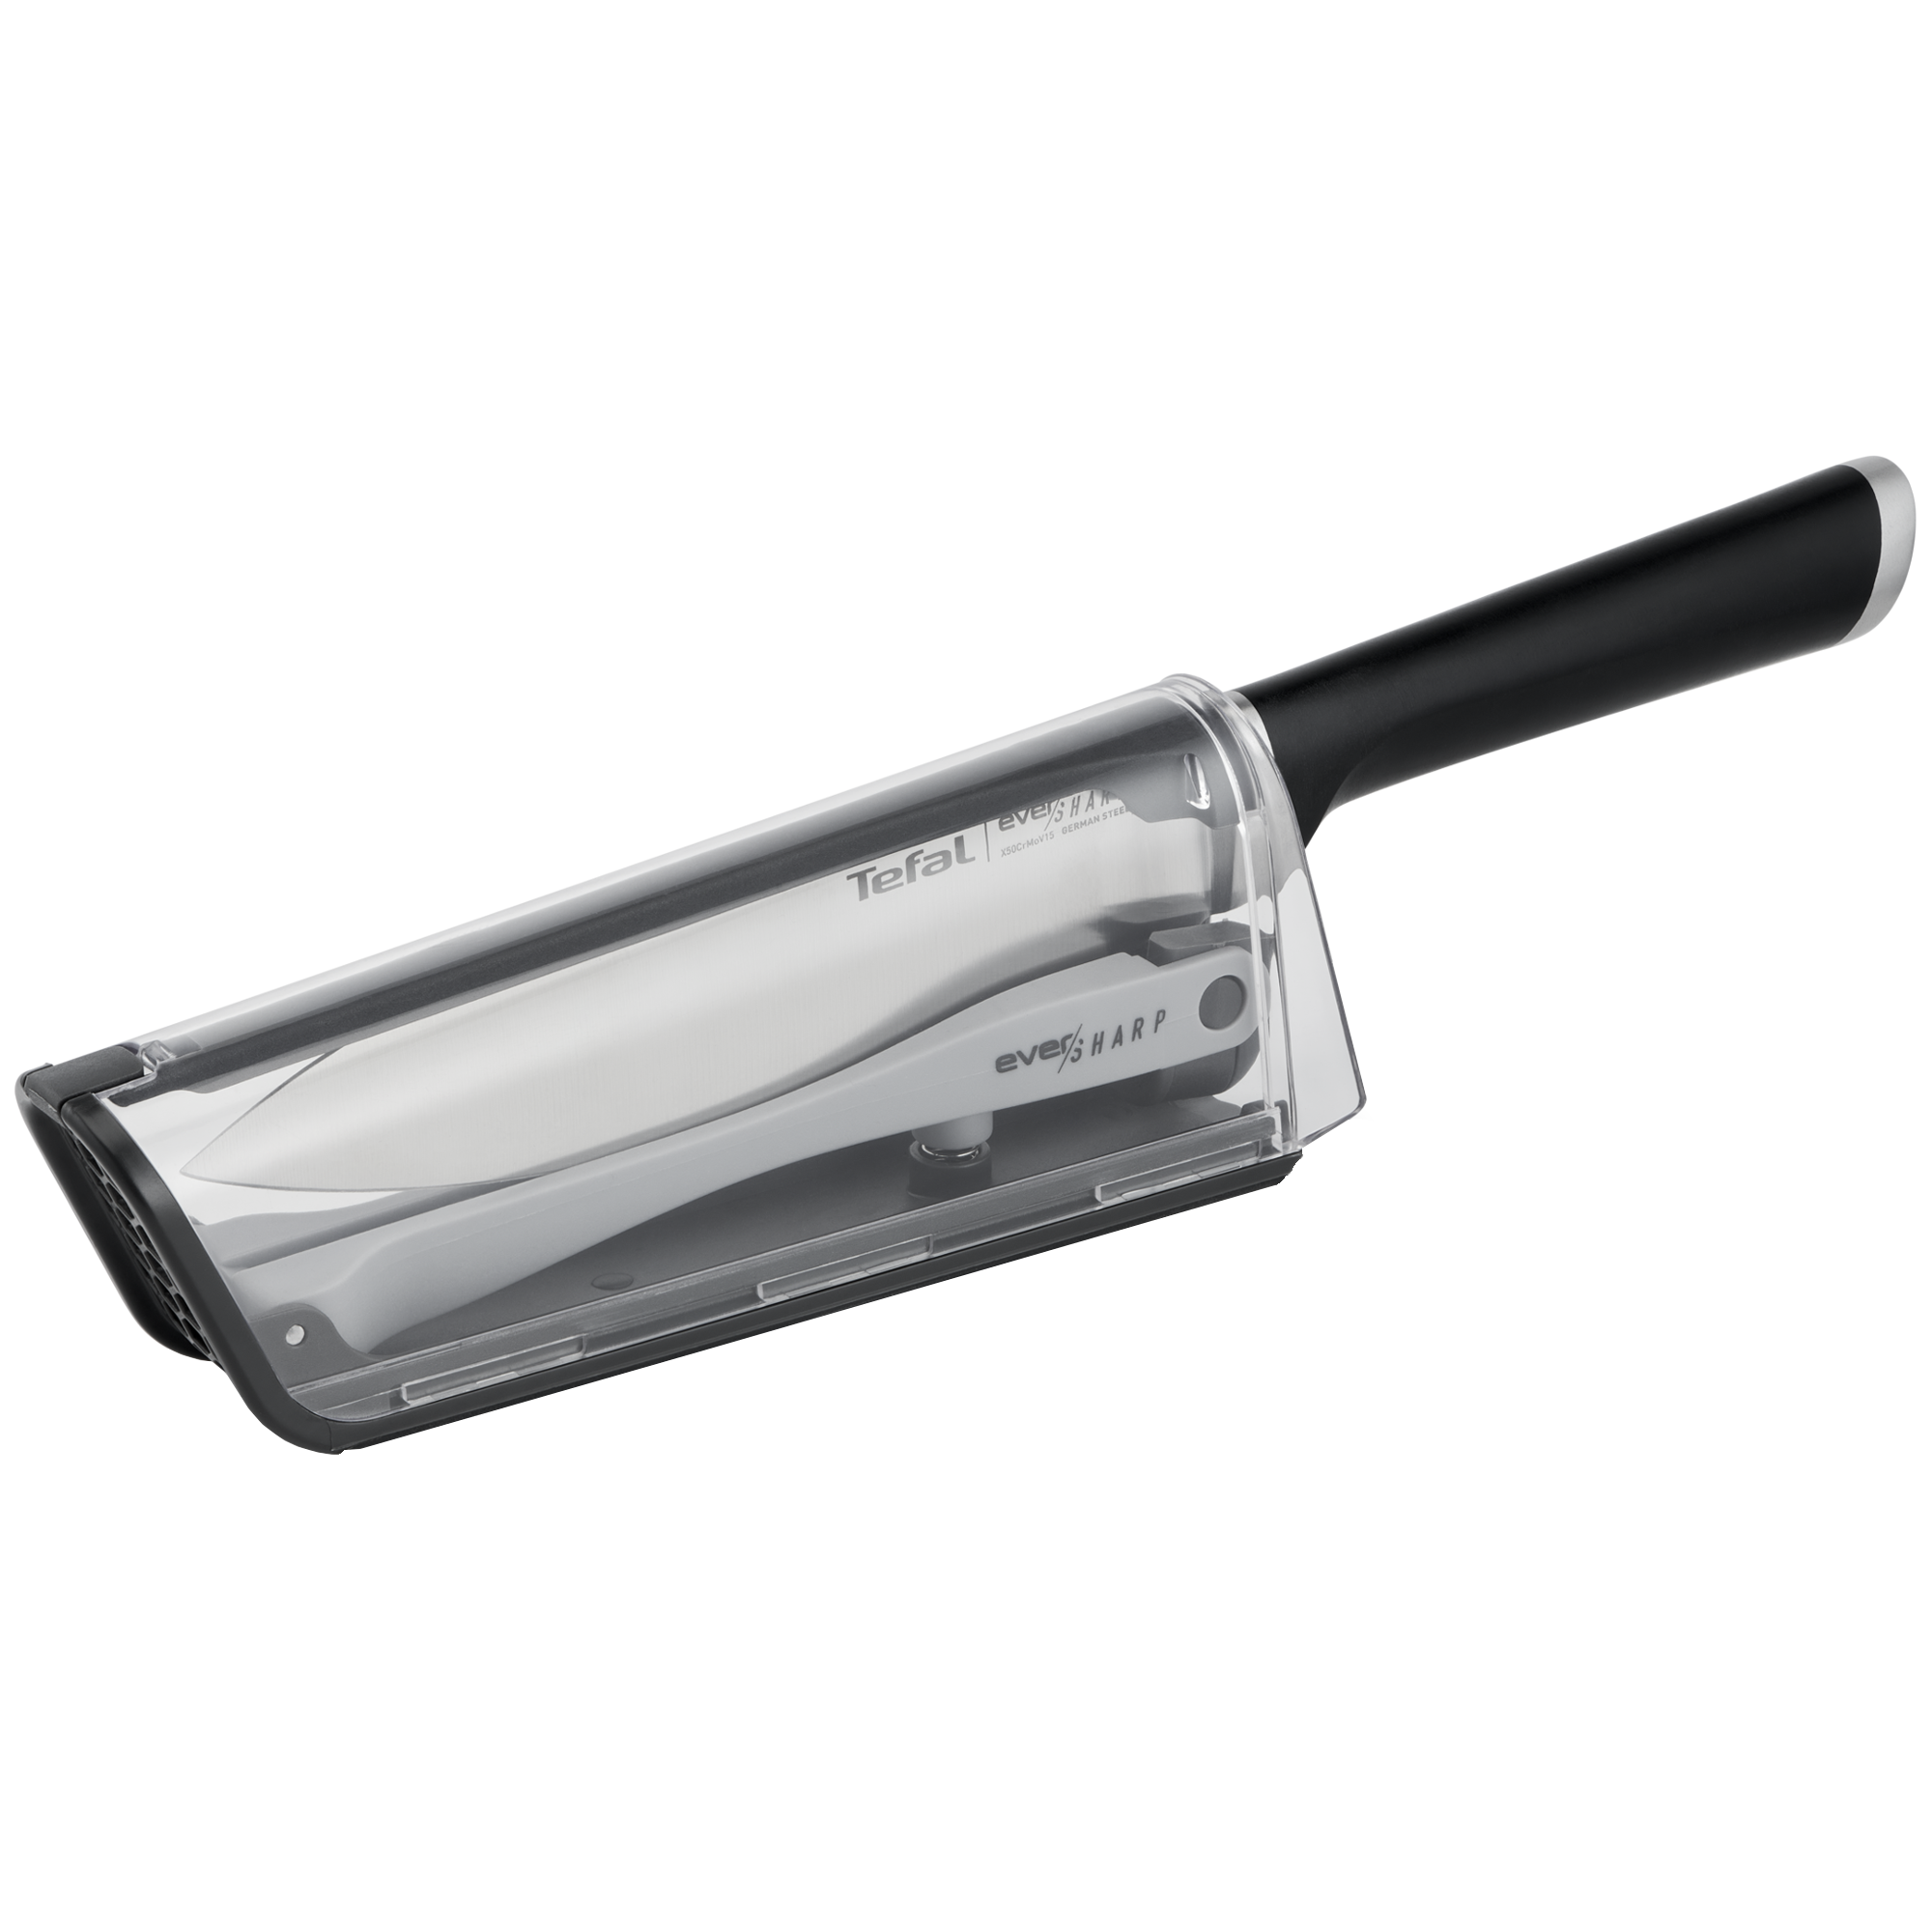 Tefal Chef's knife with sharpener 16.5 cm